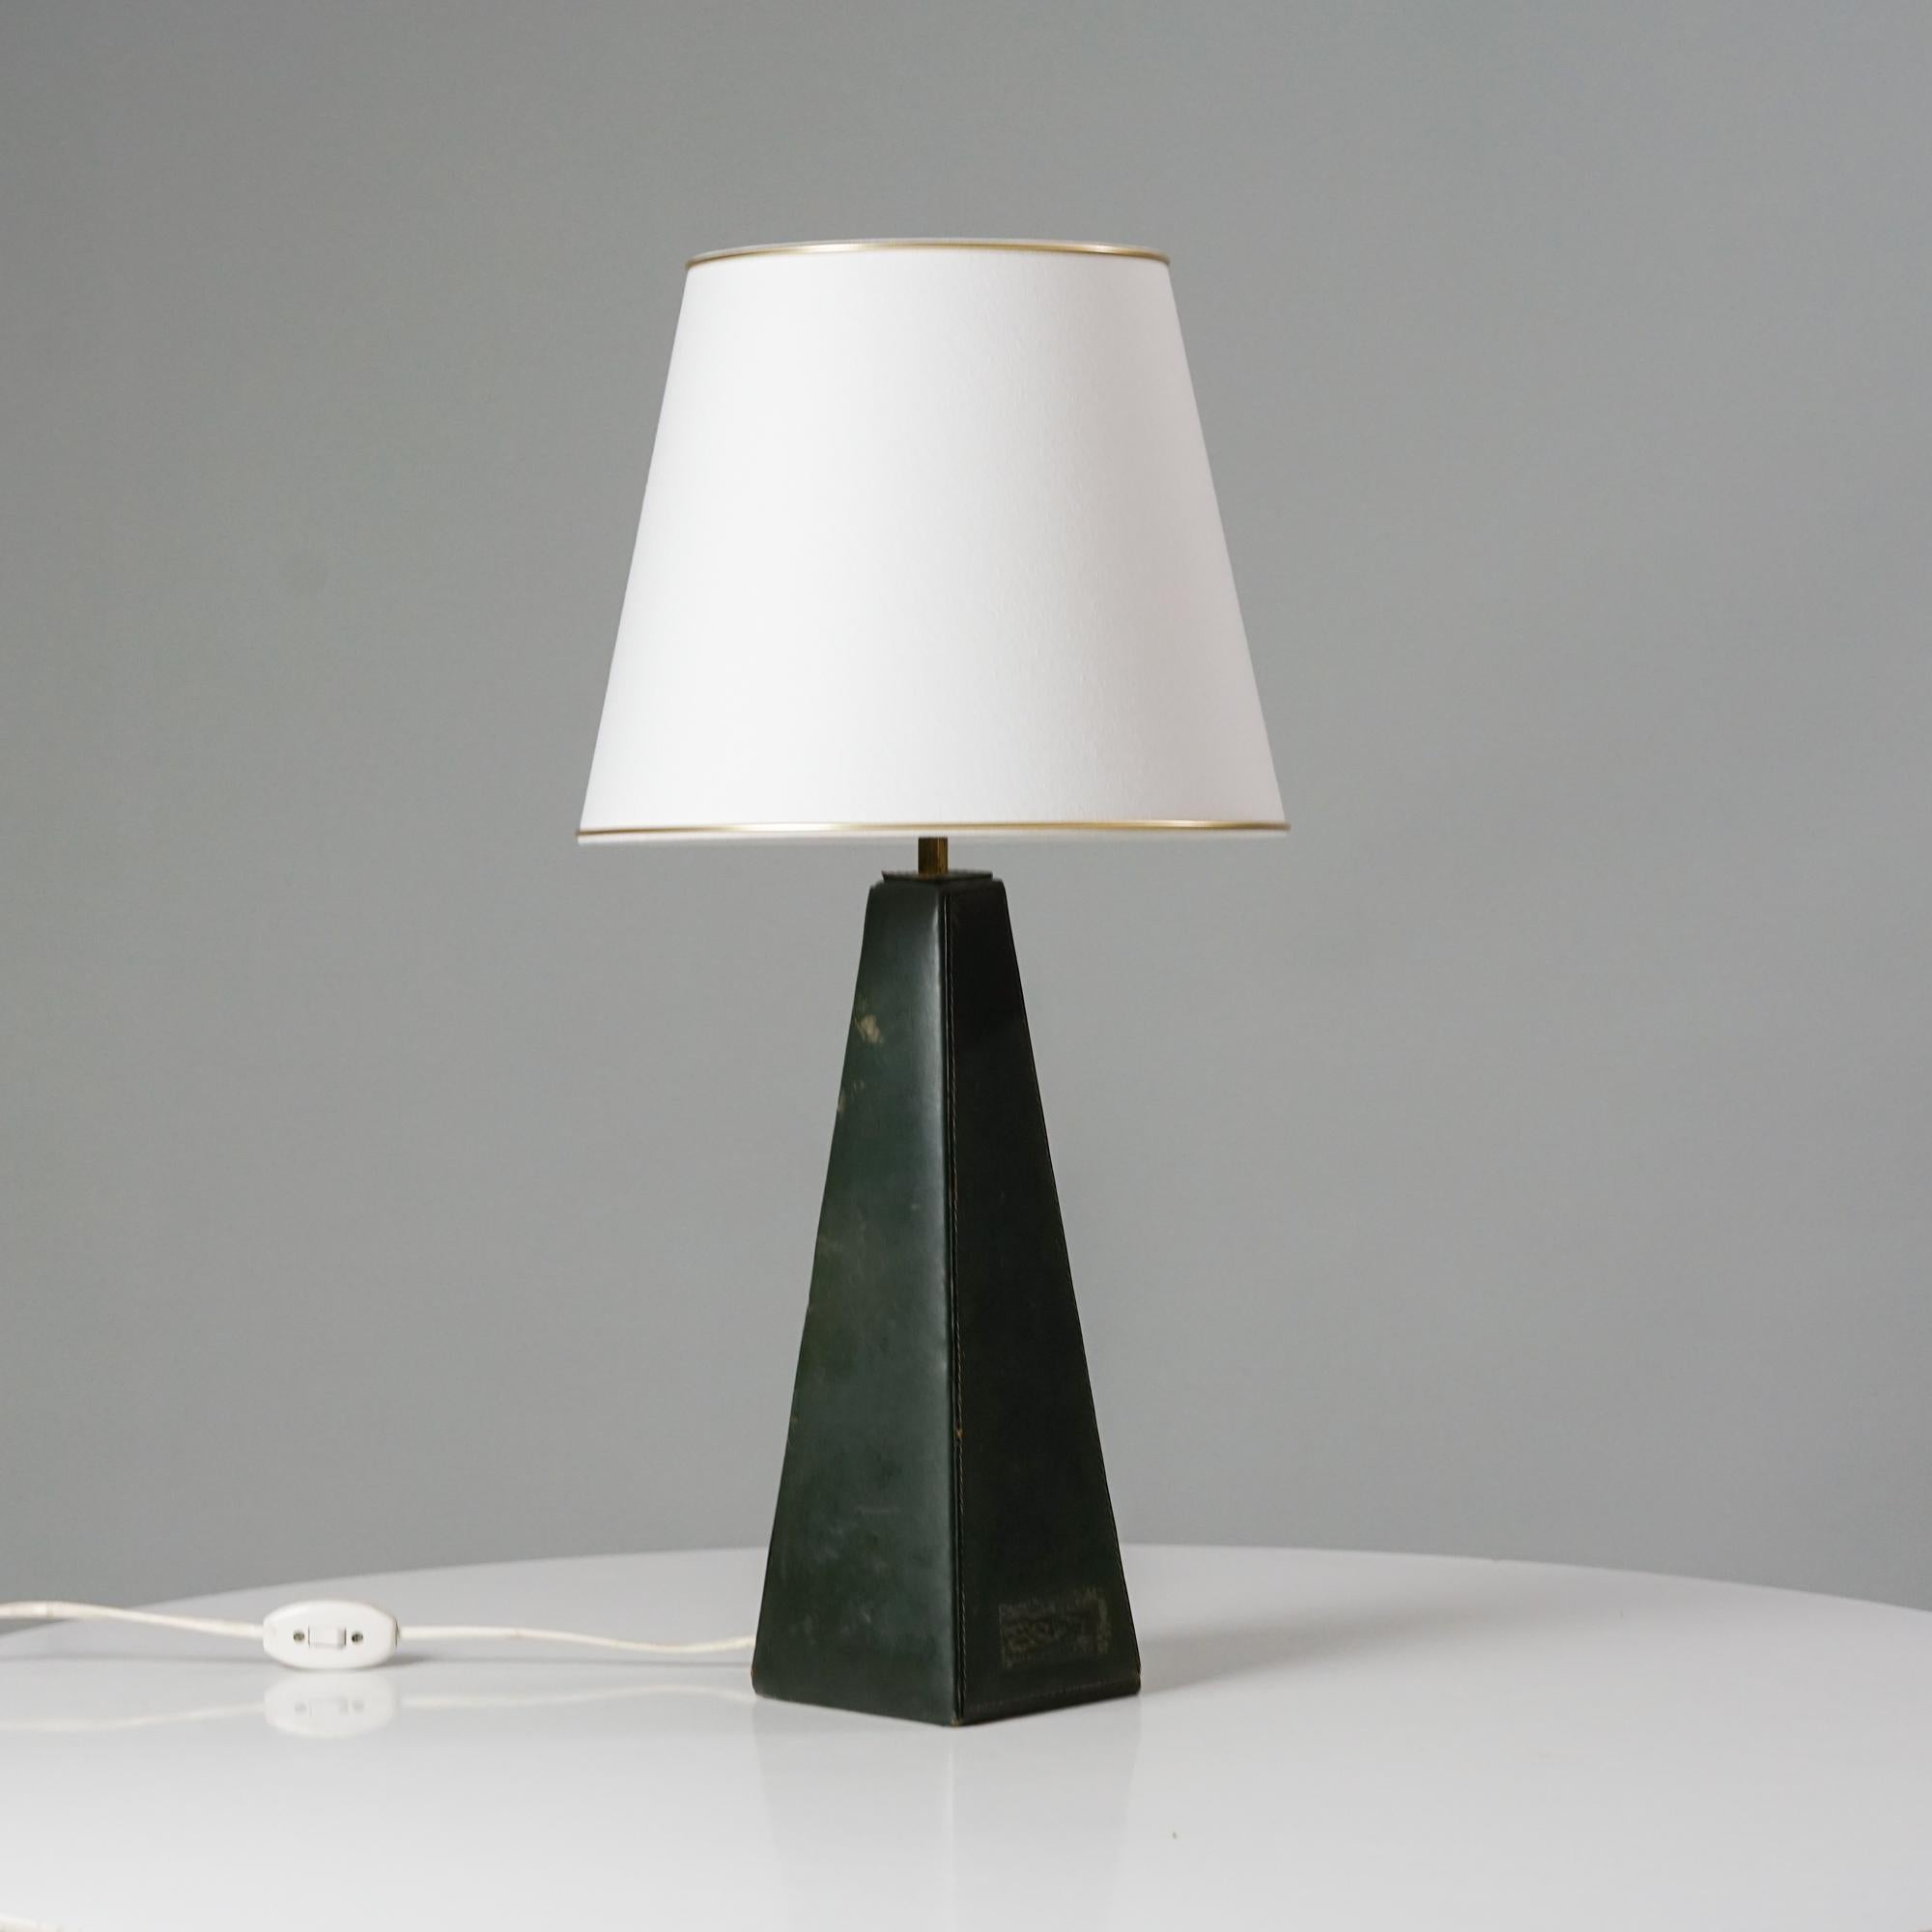 Finnish Lisa Johansson-Pape Rare Leather Table Lamp, Orno Oy, 1960s For Sale